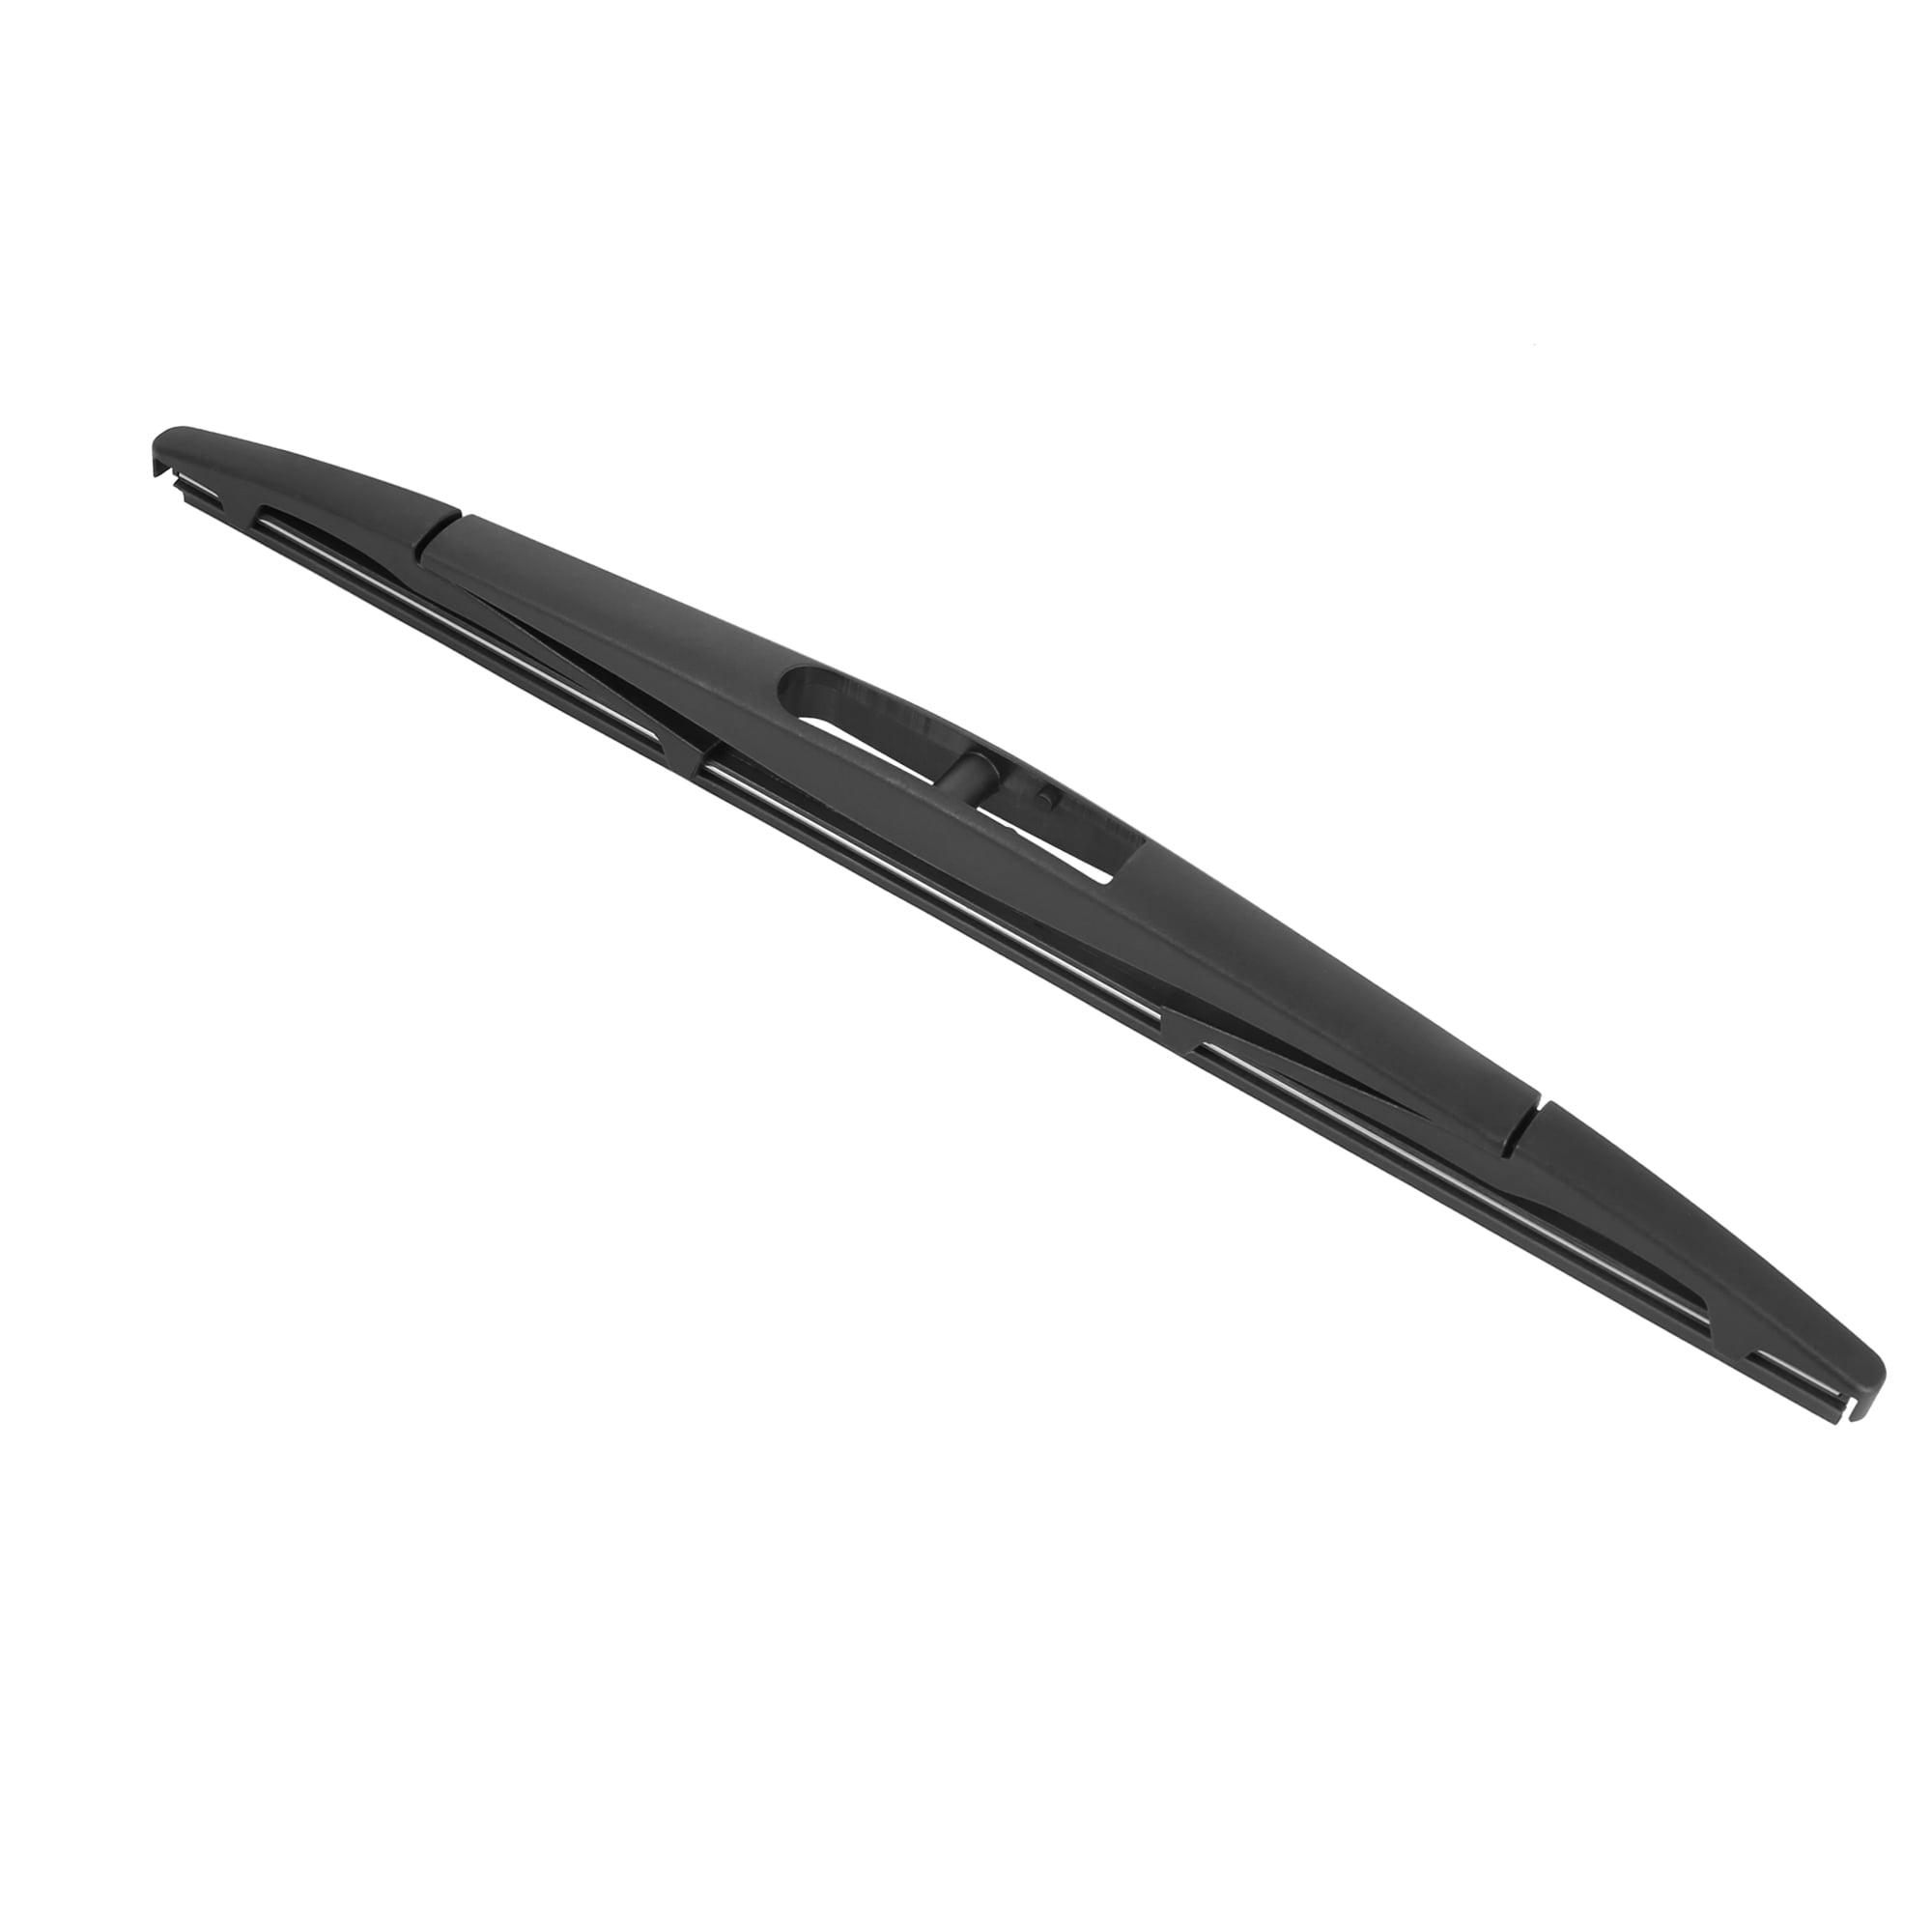 300mm Rear Windshield Wiper Blade for 2013-2018 Honda Civic - Walmart.com - Walmart.com 2018 Honda Civic Si Windshield Wipers Size